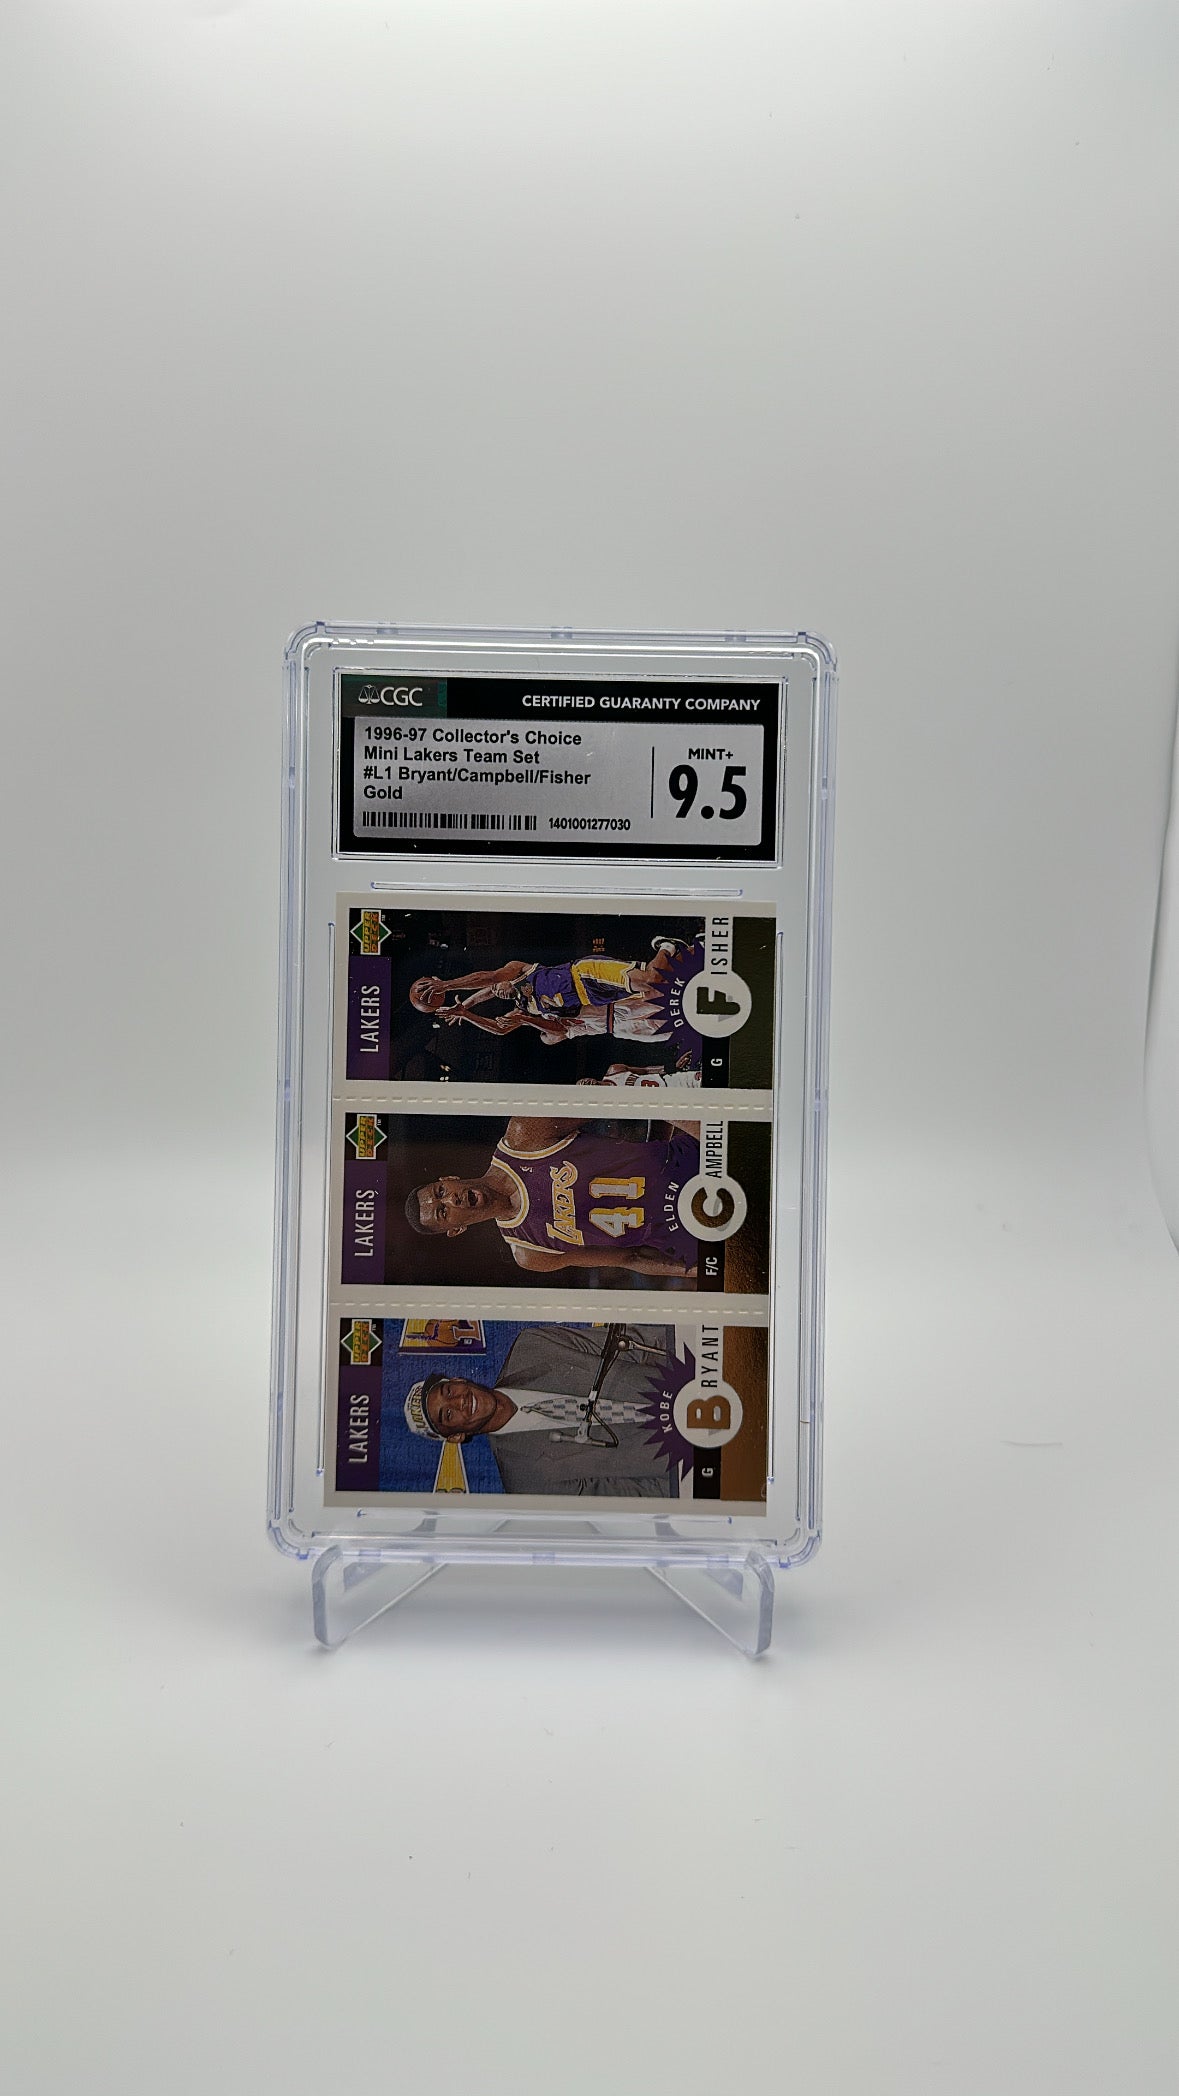 1996-97 Upper Deck Collectors Choice - Bryant / Campbell / Fisher L1 - Mini Lakers Team Set - CGC 9.5